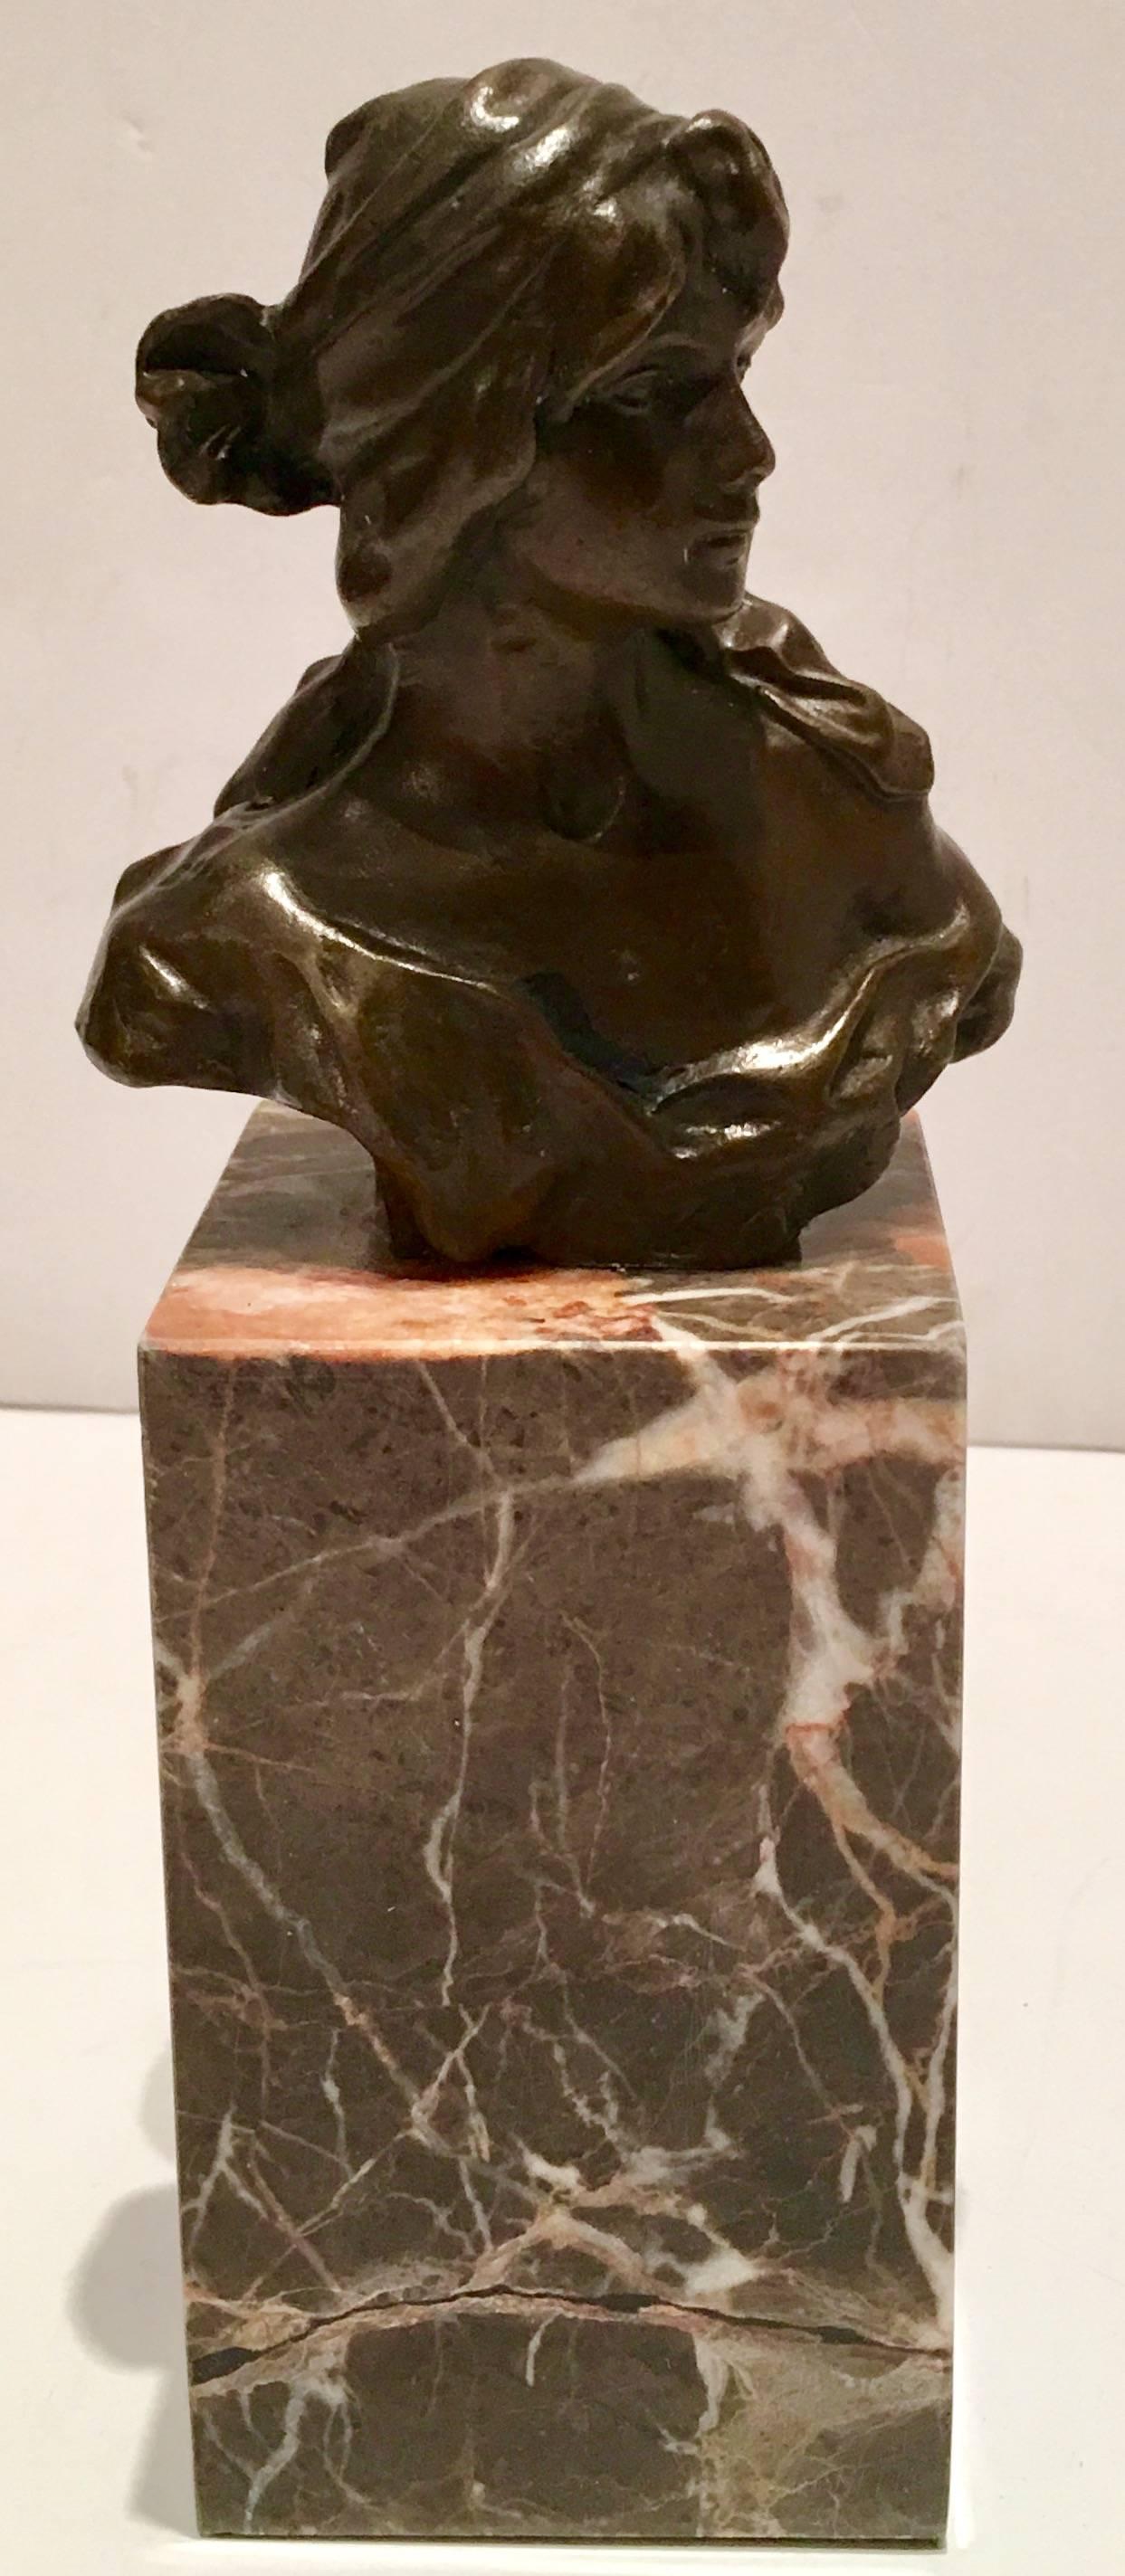 French Art Nouveau style female bronze bust on marble stand signed, Milo. Bust measures. 4.25" H x 4" L x 1.75" depth.